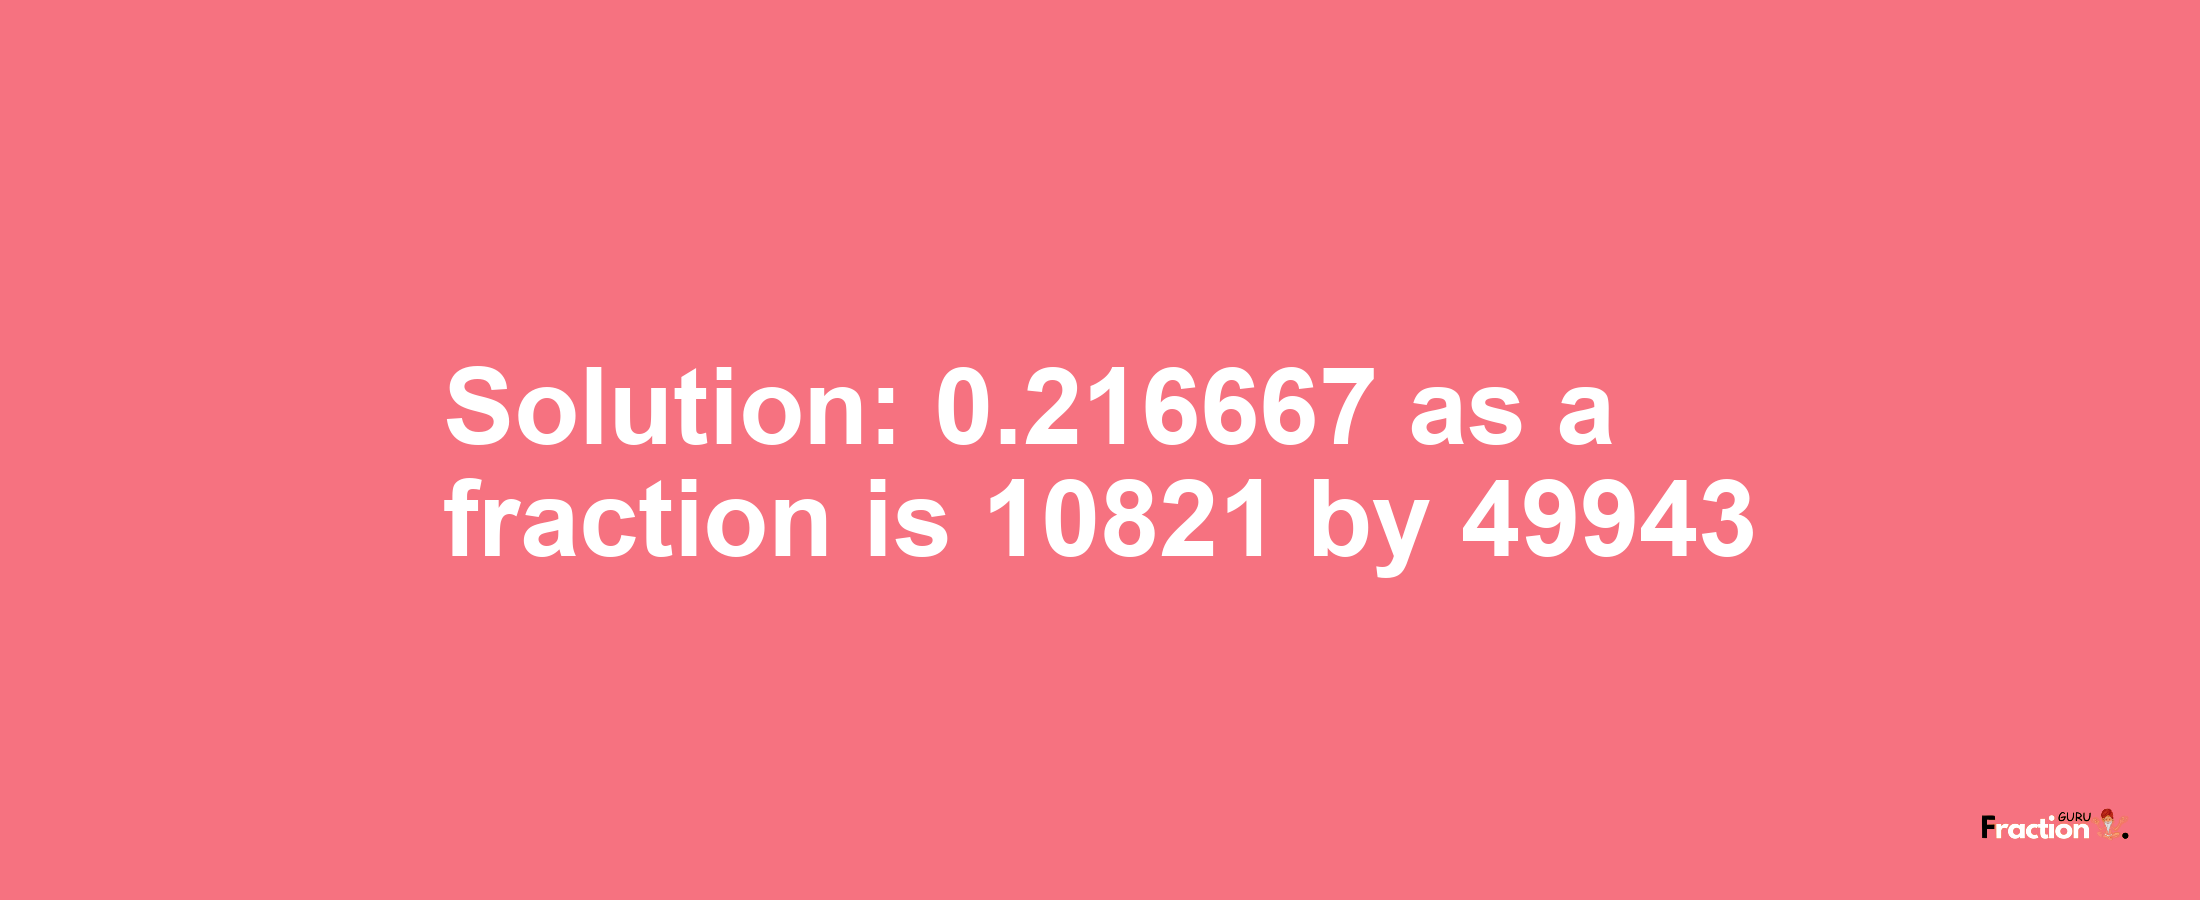 Solution:0.216667 as a fraction is 10821/49943